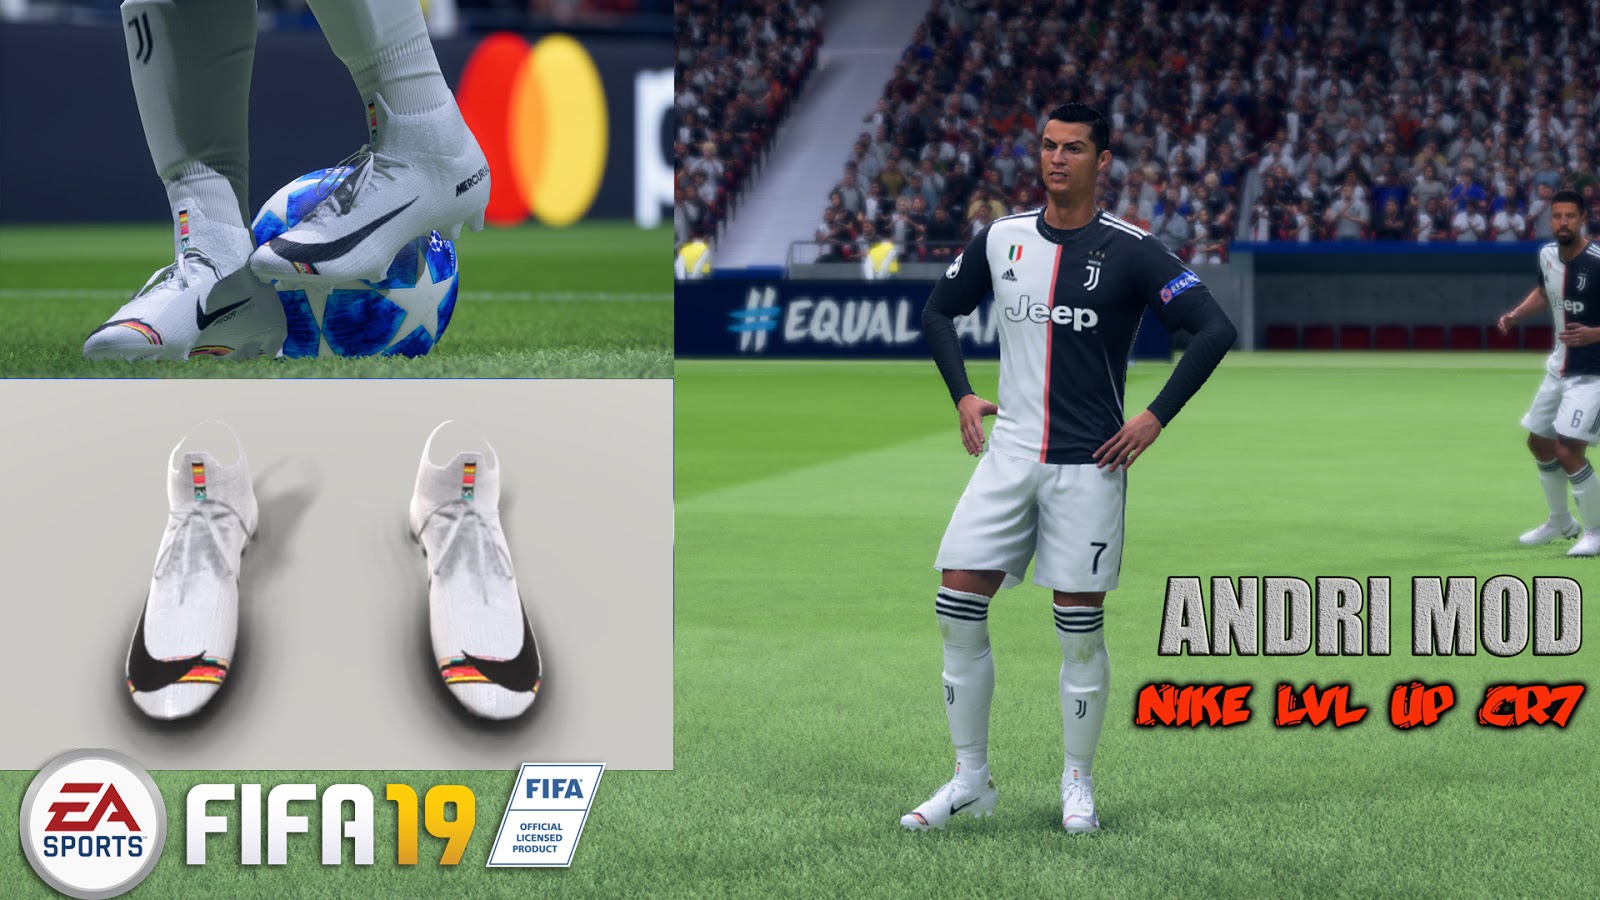 new nike boots fifa 20